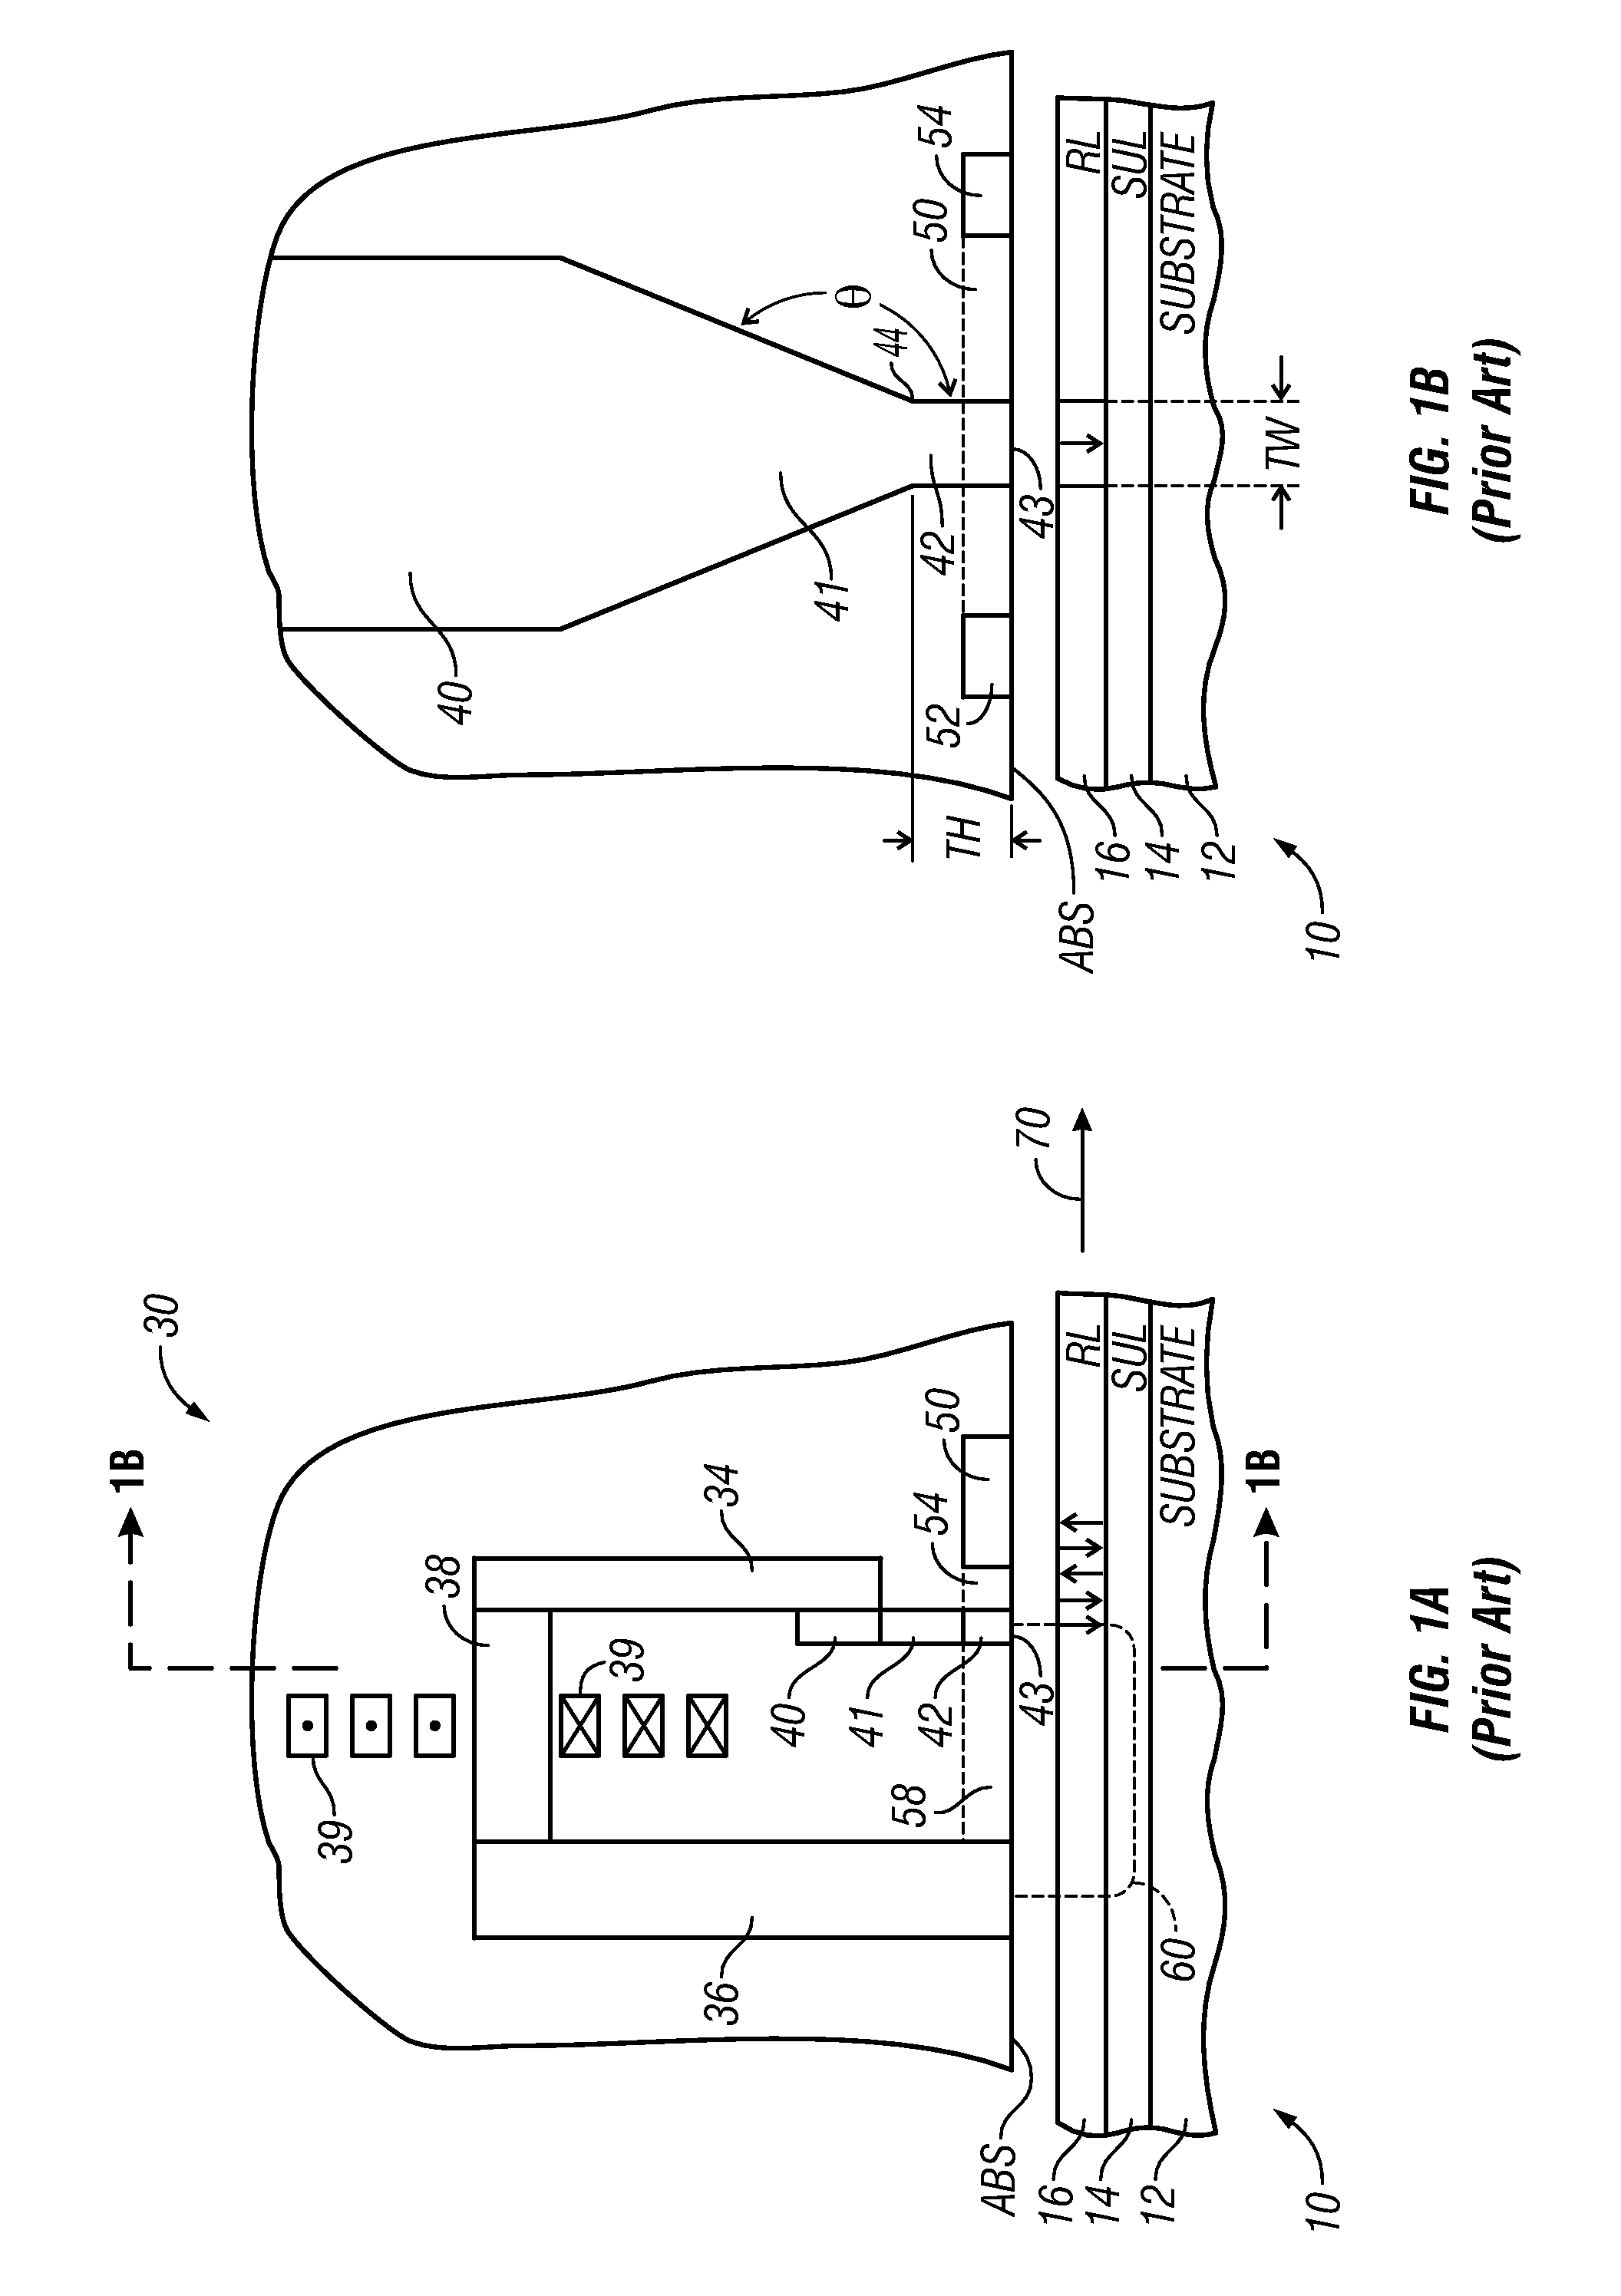 Perpendicular magnetic recording write head with flux-conductor contacting write pole